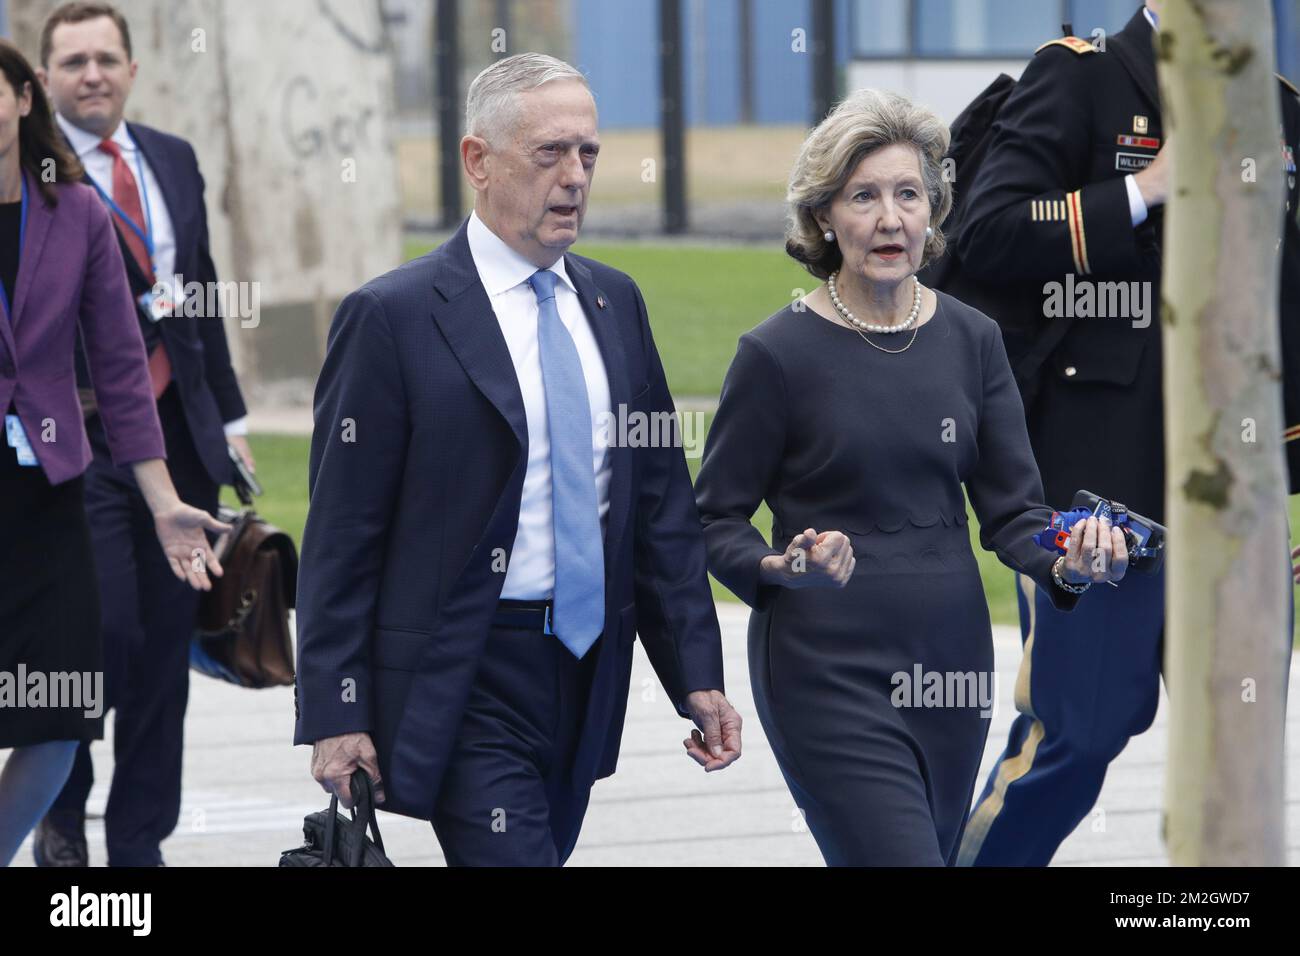 U.S. Defense Secretary Jim Mattis (L) pictured at the arrivals on day two of a summit of the NATO (North Atlantic Treaty Organization) military alliance, Thursday 12 July 2018, in Brussels. BELGA PHOTO POOL PABLO GARRIGOS CUCARELLA  Stock Photo